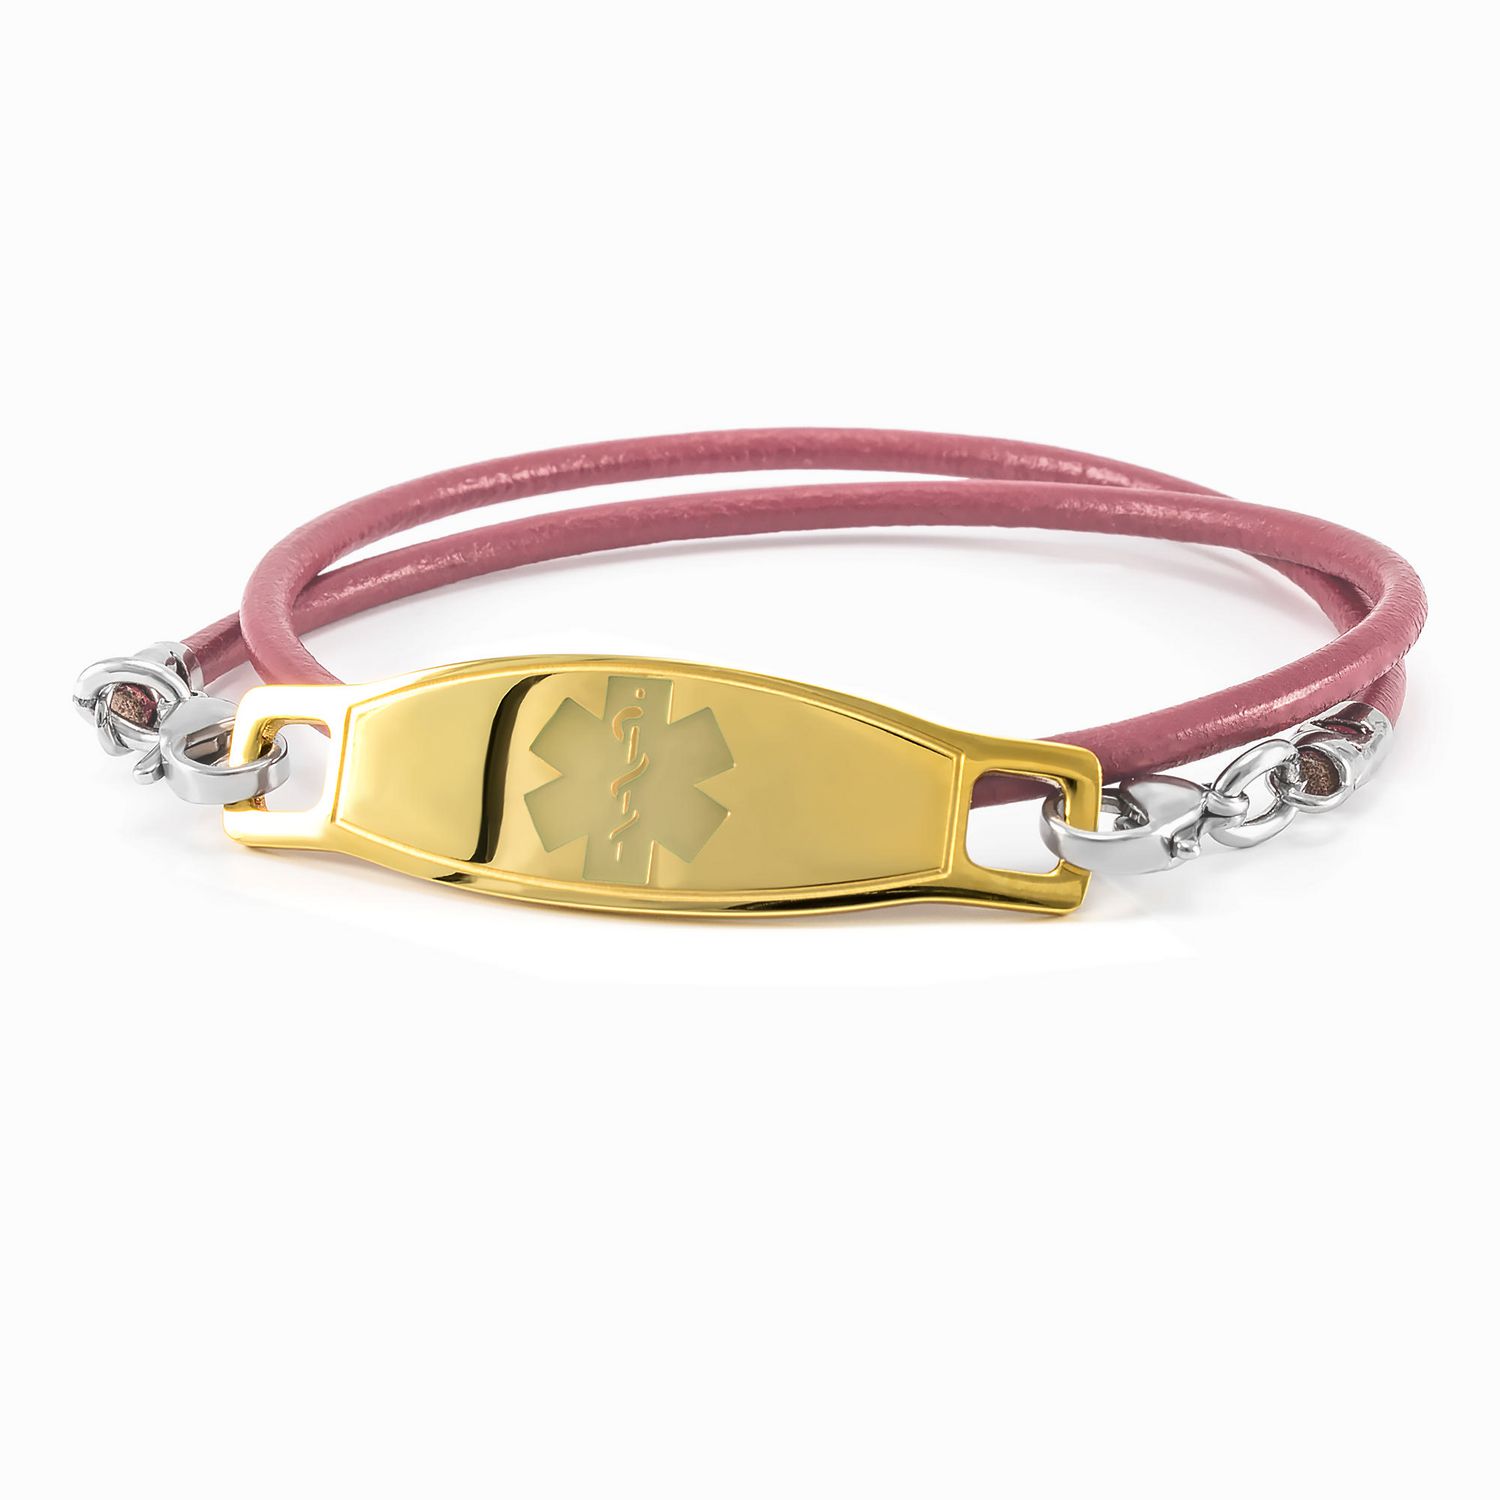 Steel Yellow Enamel Tag Engraving Incl. MedicEngraved Customized Leather Medical ID Bracelet w/ 316L St